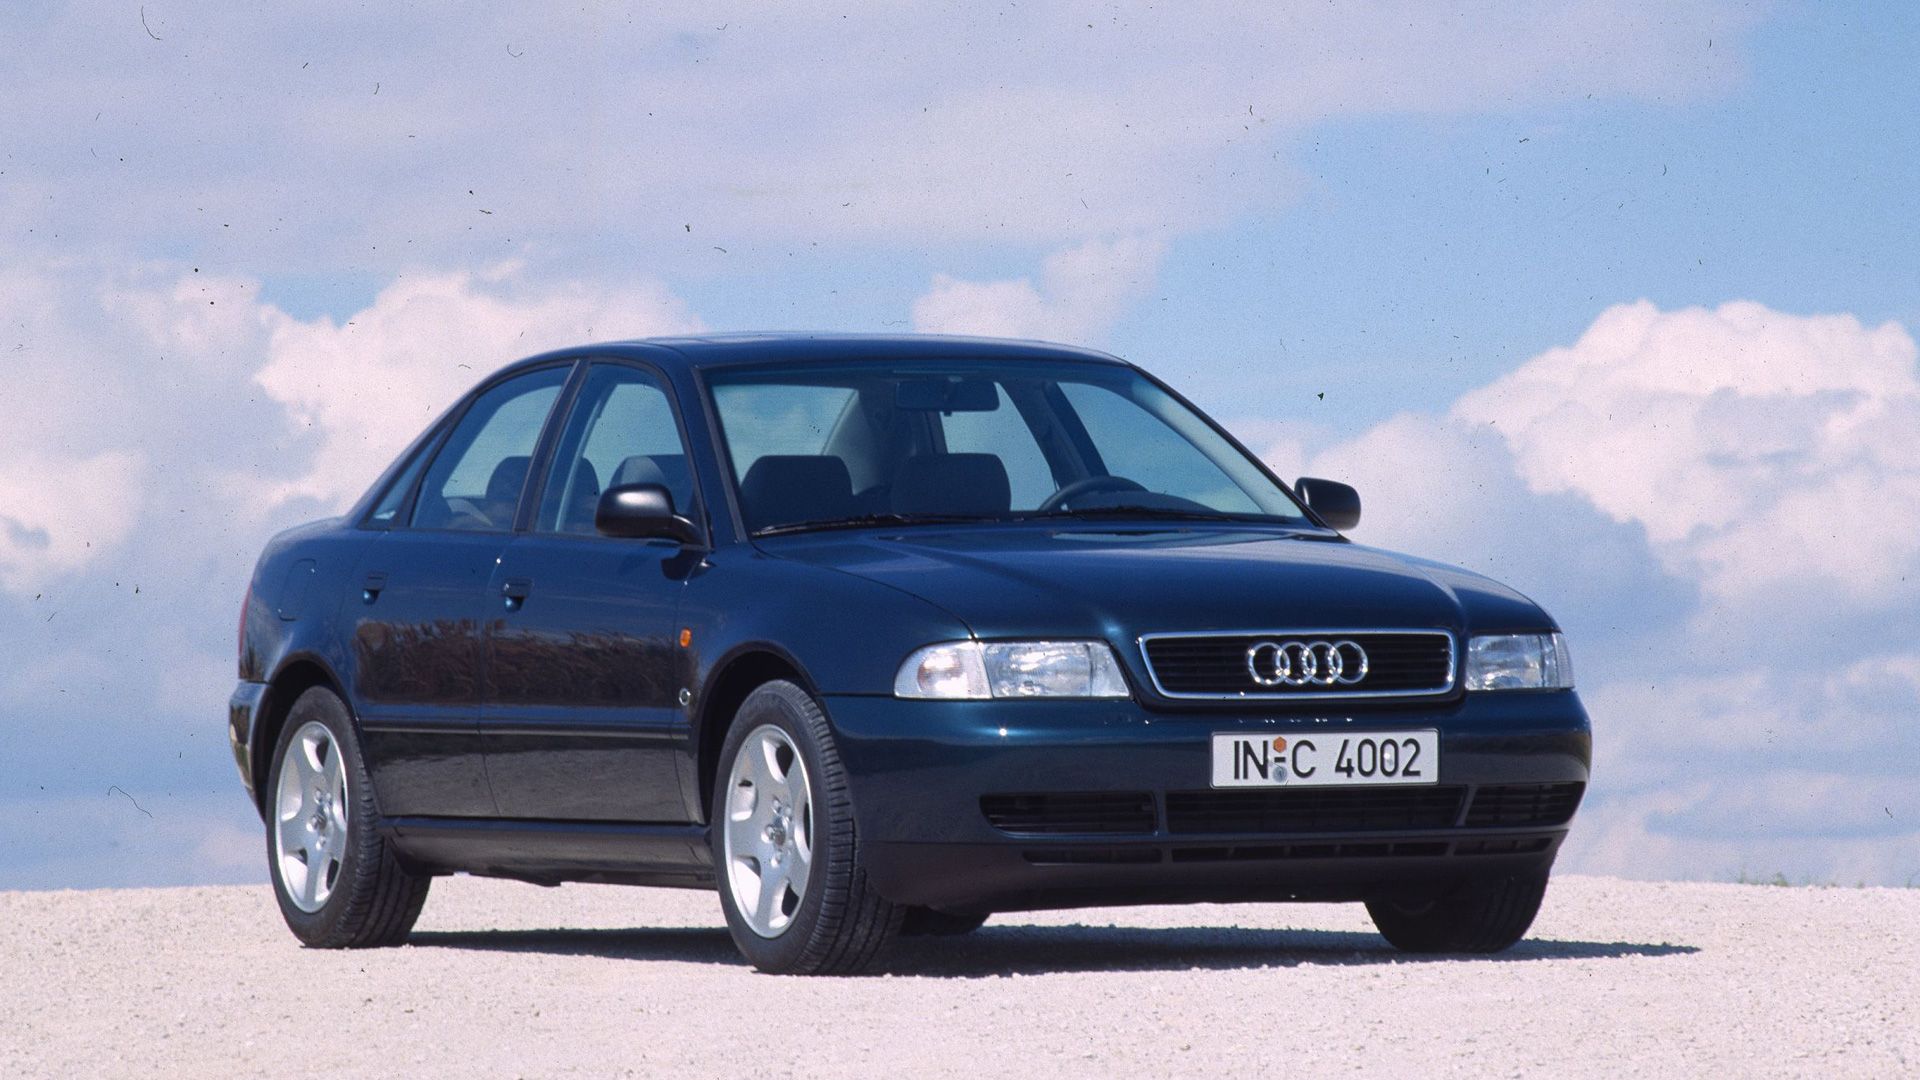 90s Cult Car: 25 Years of the Audi A4